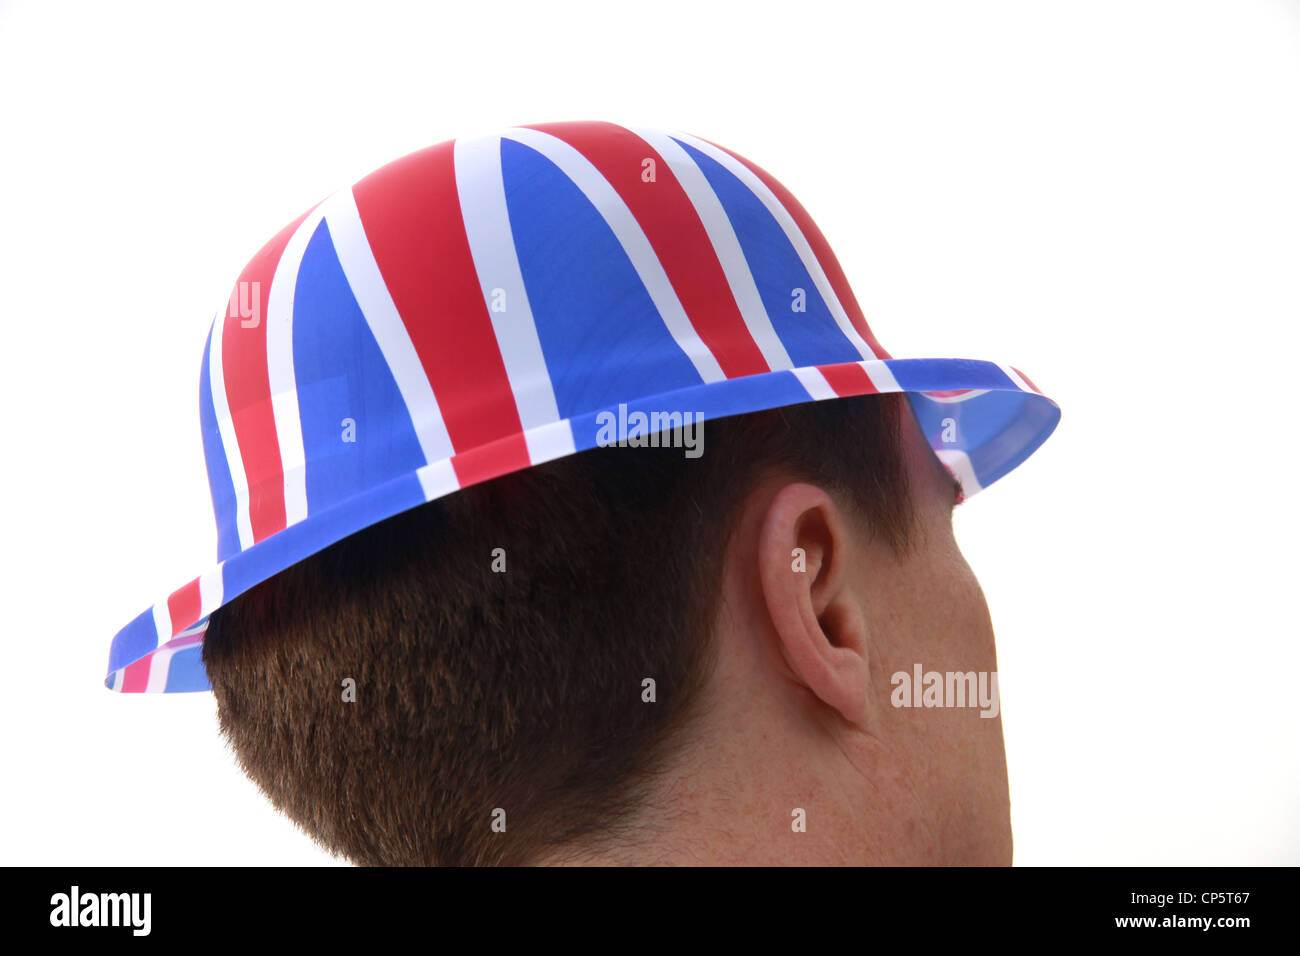 dressing up in a plastic united kingdom flag hat Stock Photo